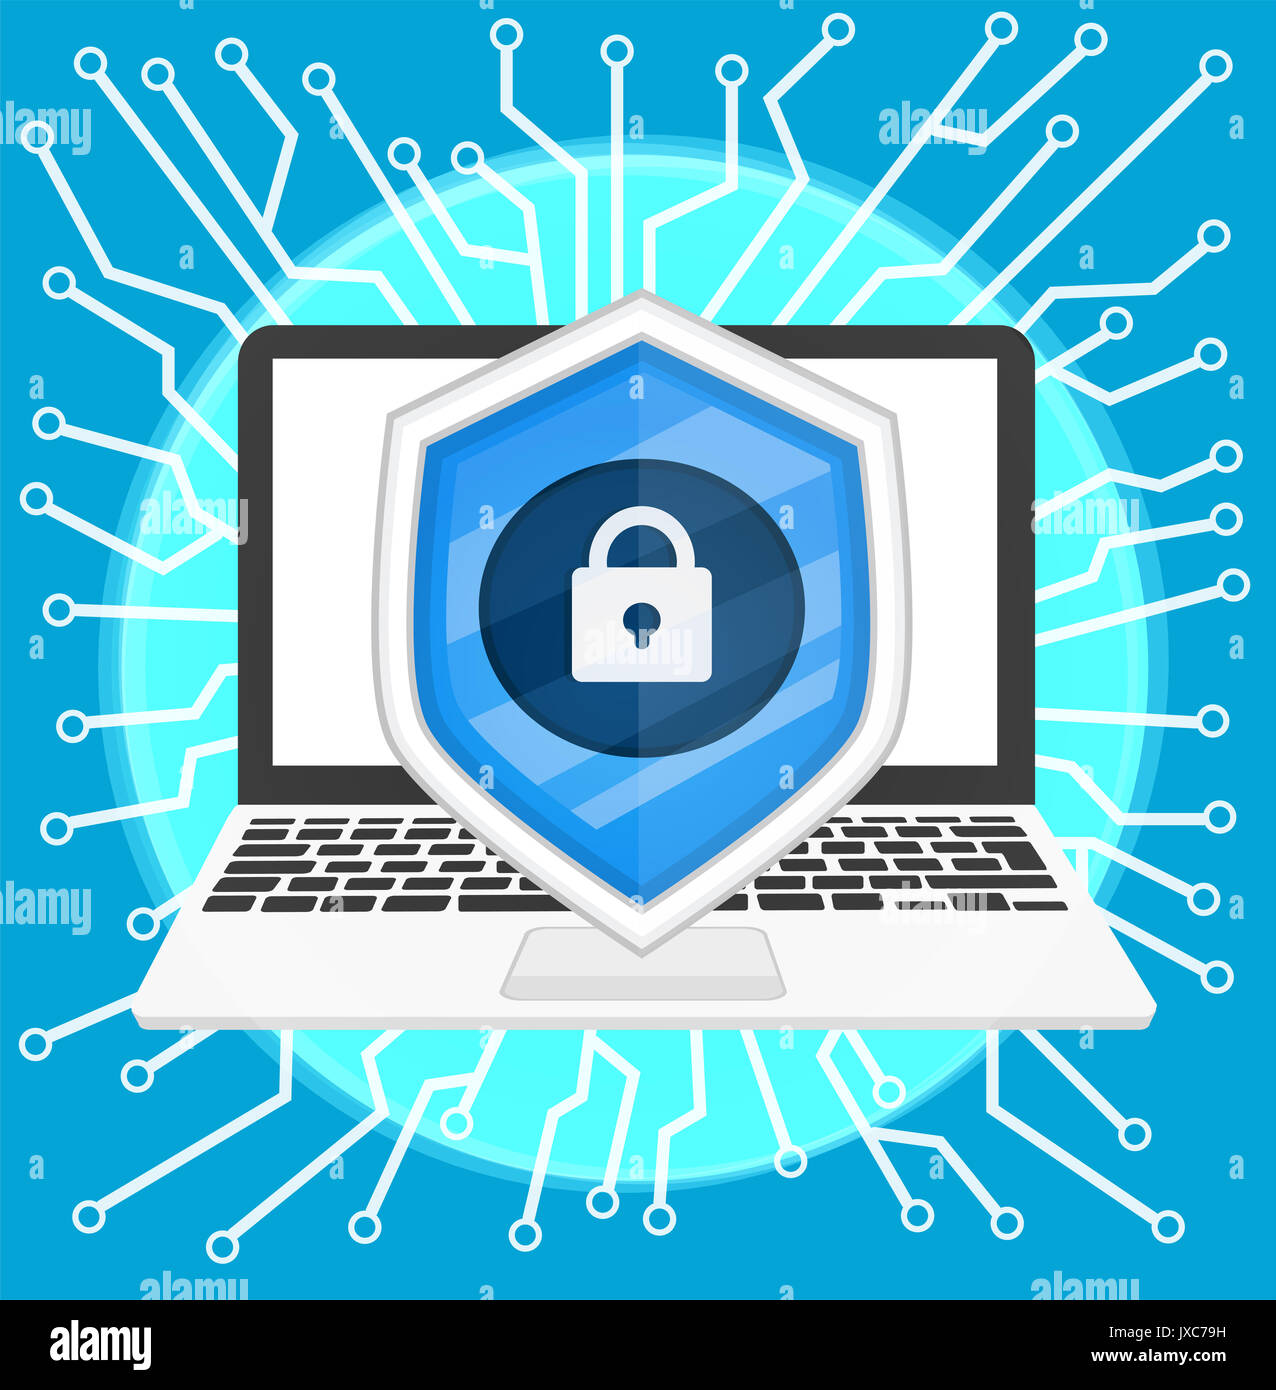 background cyber security vector ,illustration for website Stock Photo